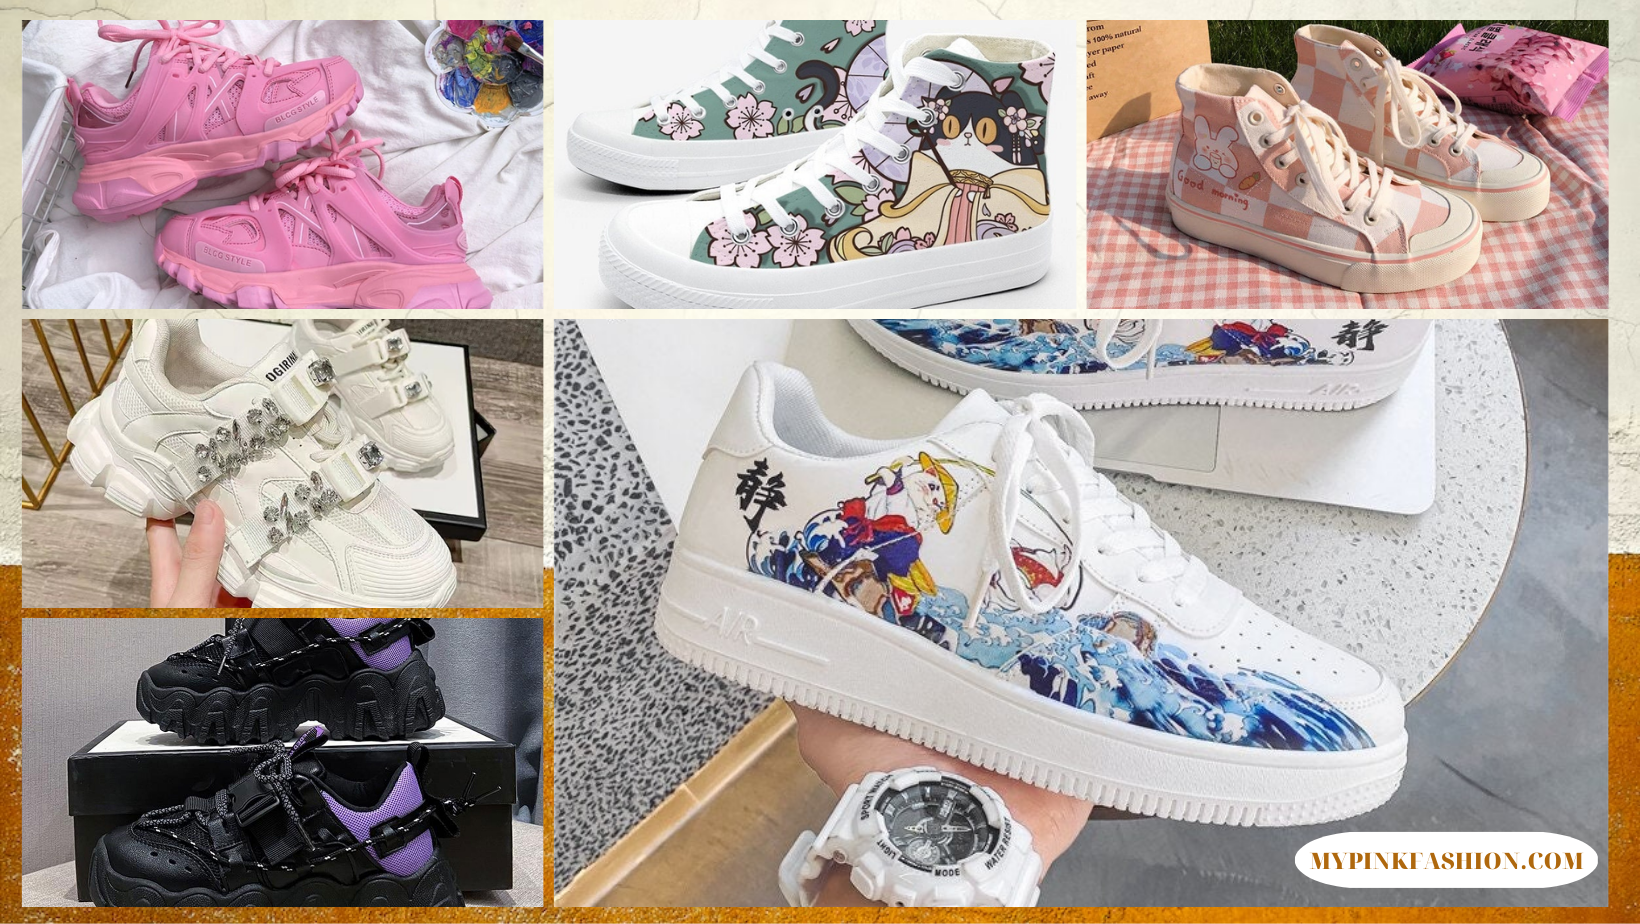 Stay Ahead of the Trend with Platform Sneakers